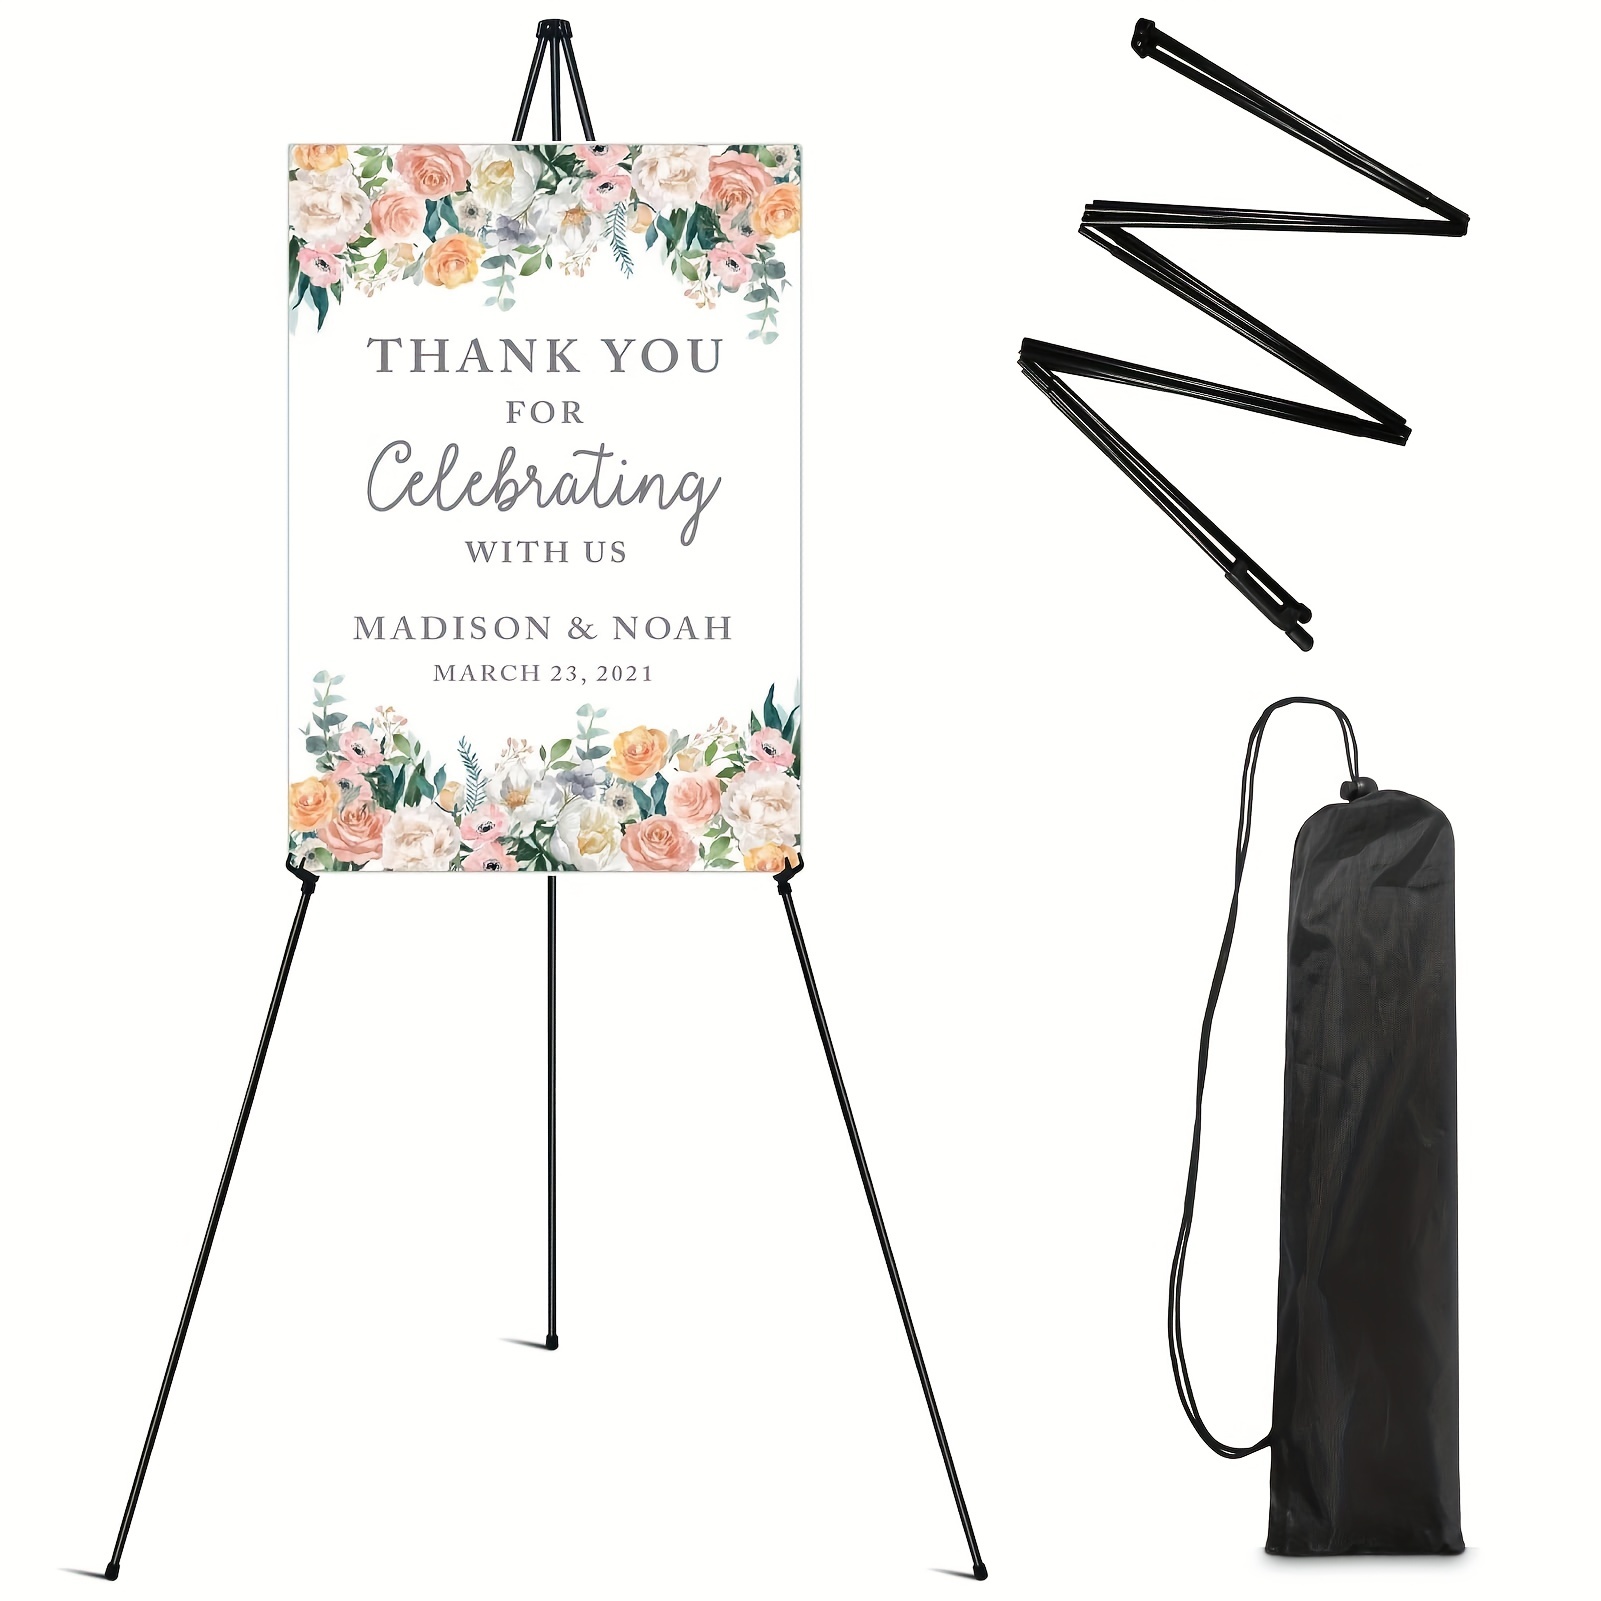 T-Sign 63 Inches Portable Artist Easel Stand - Black Picture Stand Painting Easel with Bag - Table Top Art Drawing Easels for Painting Canvas Wedding